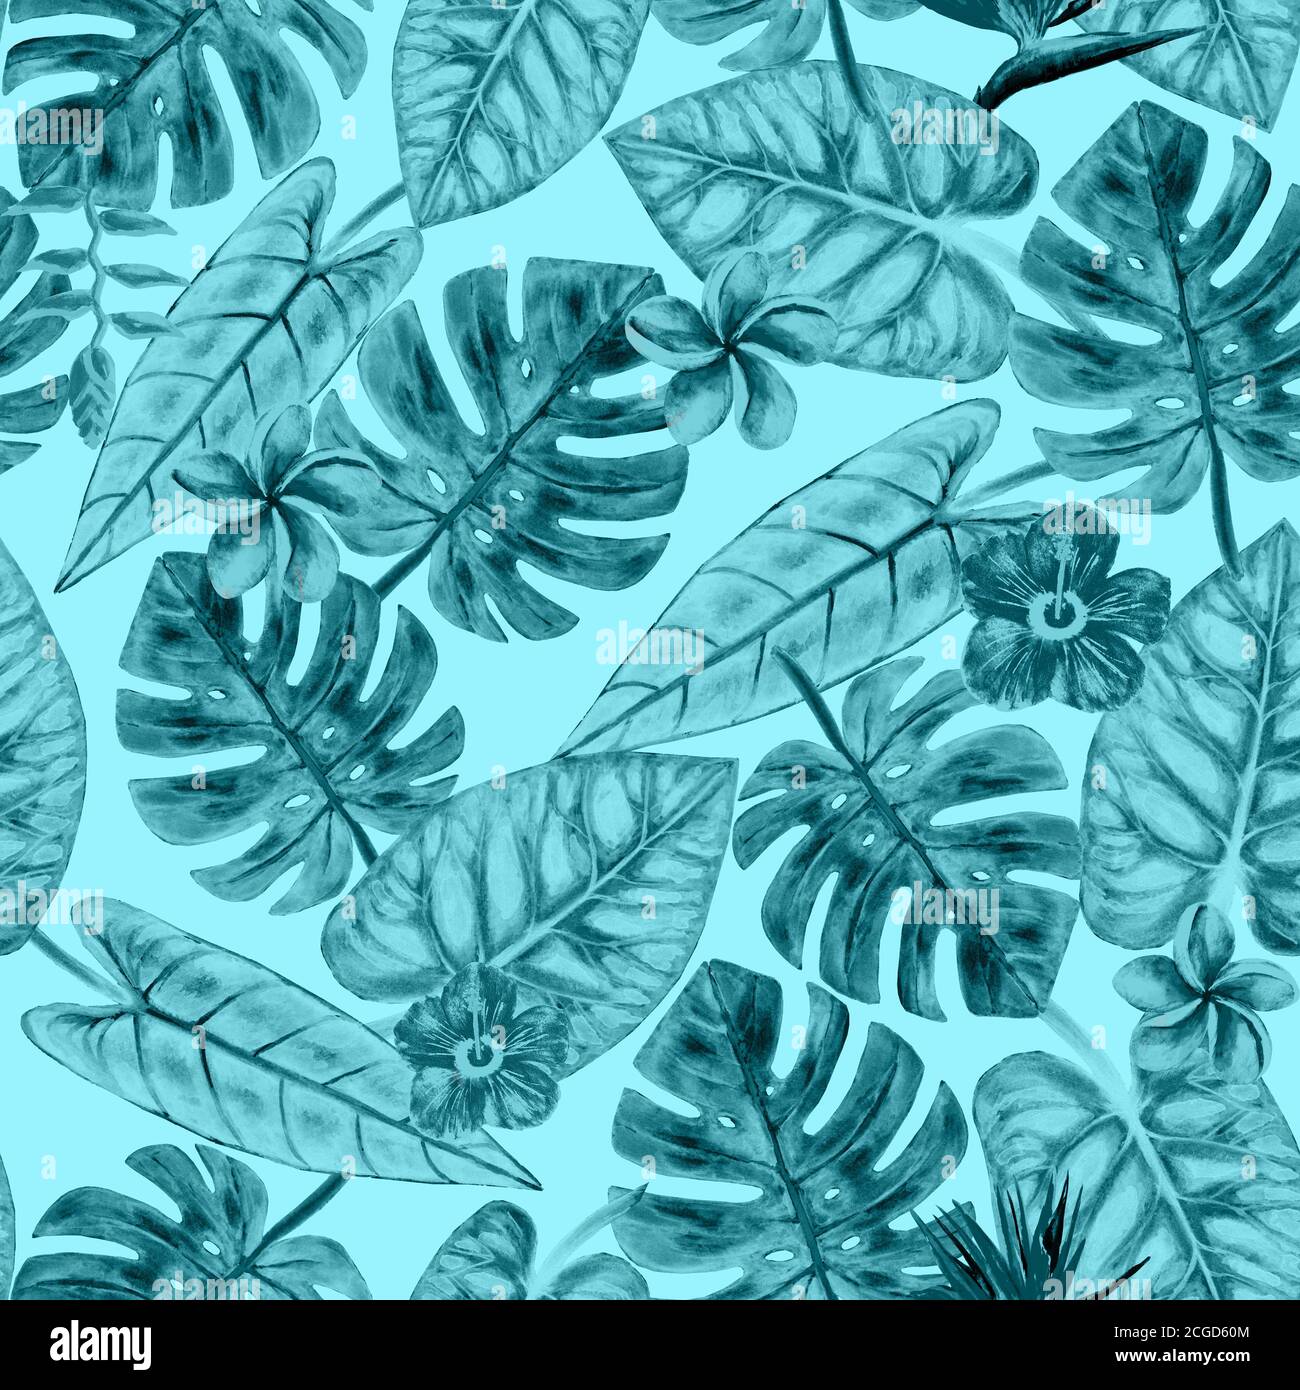 Watercolor abstract summer monochrome seamless pattern with tropical plants on blue teal background. Watercolour hand drawn exotic leaves and flowers. Stock Photo